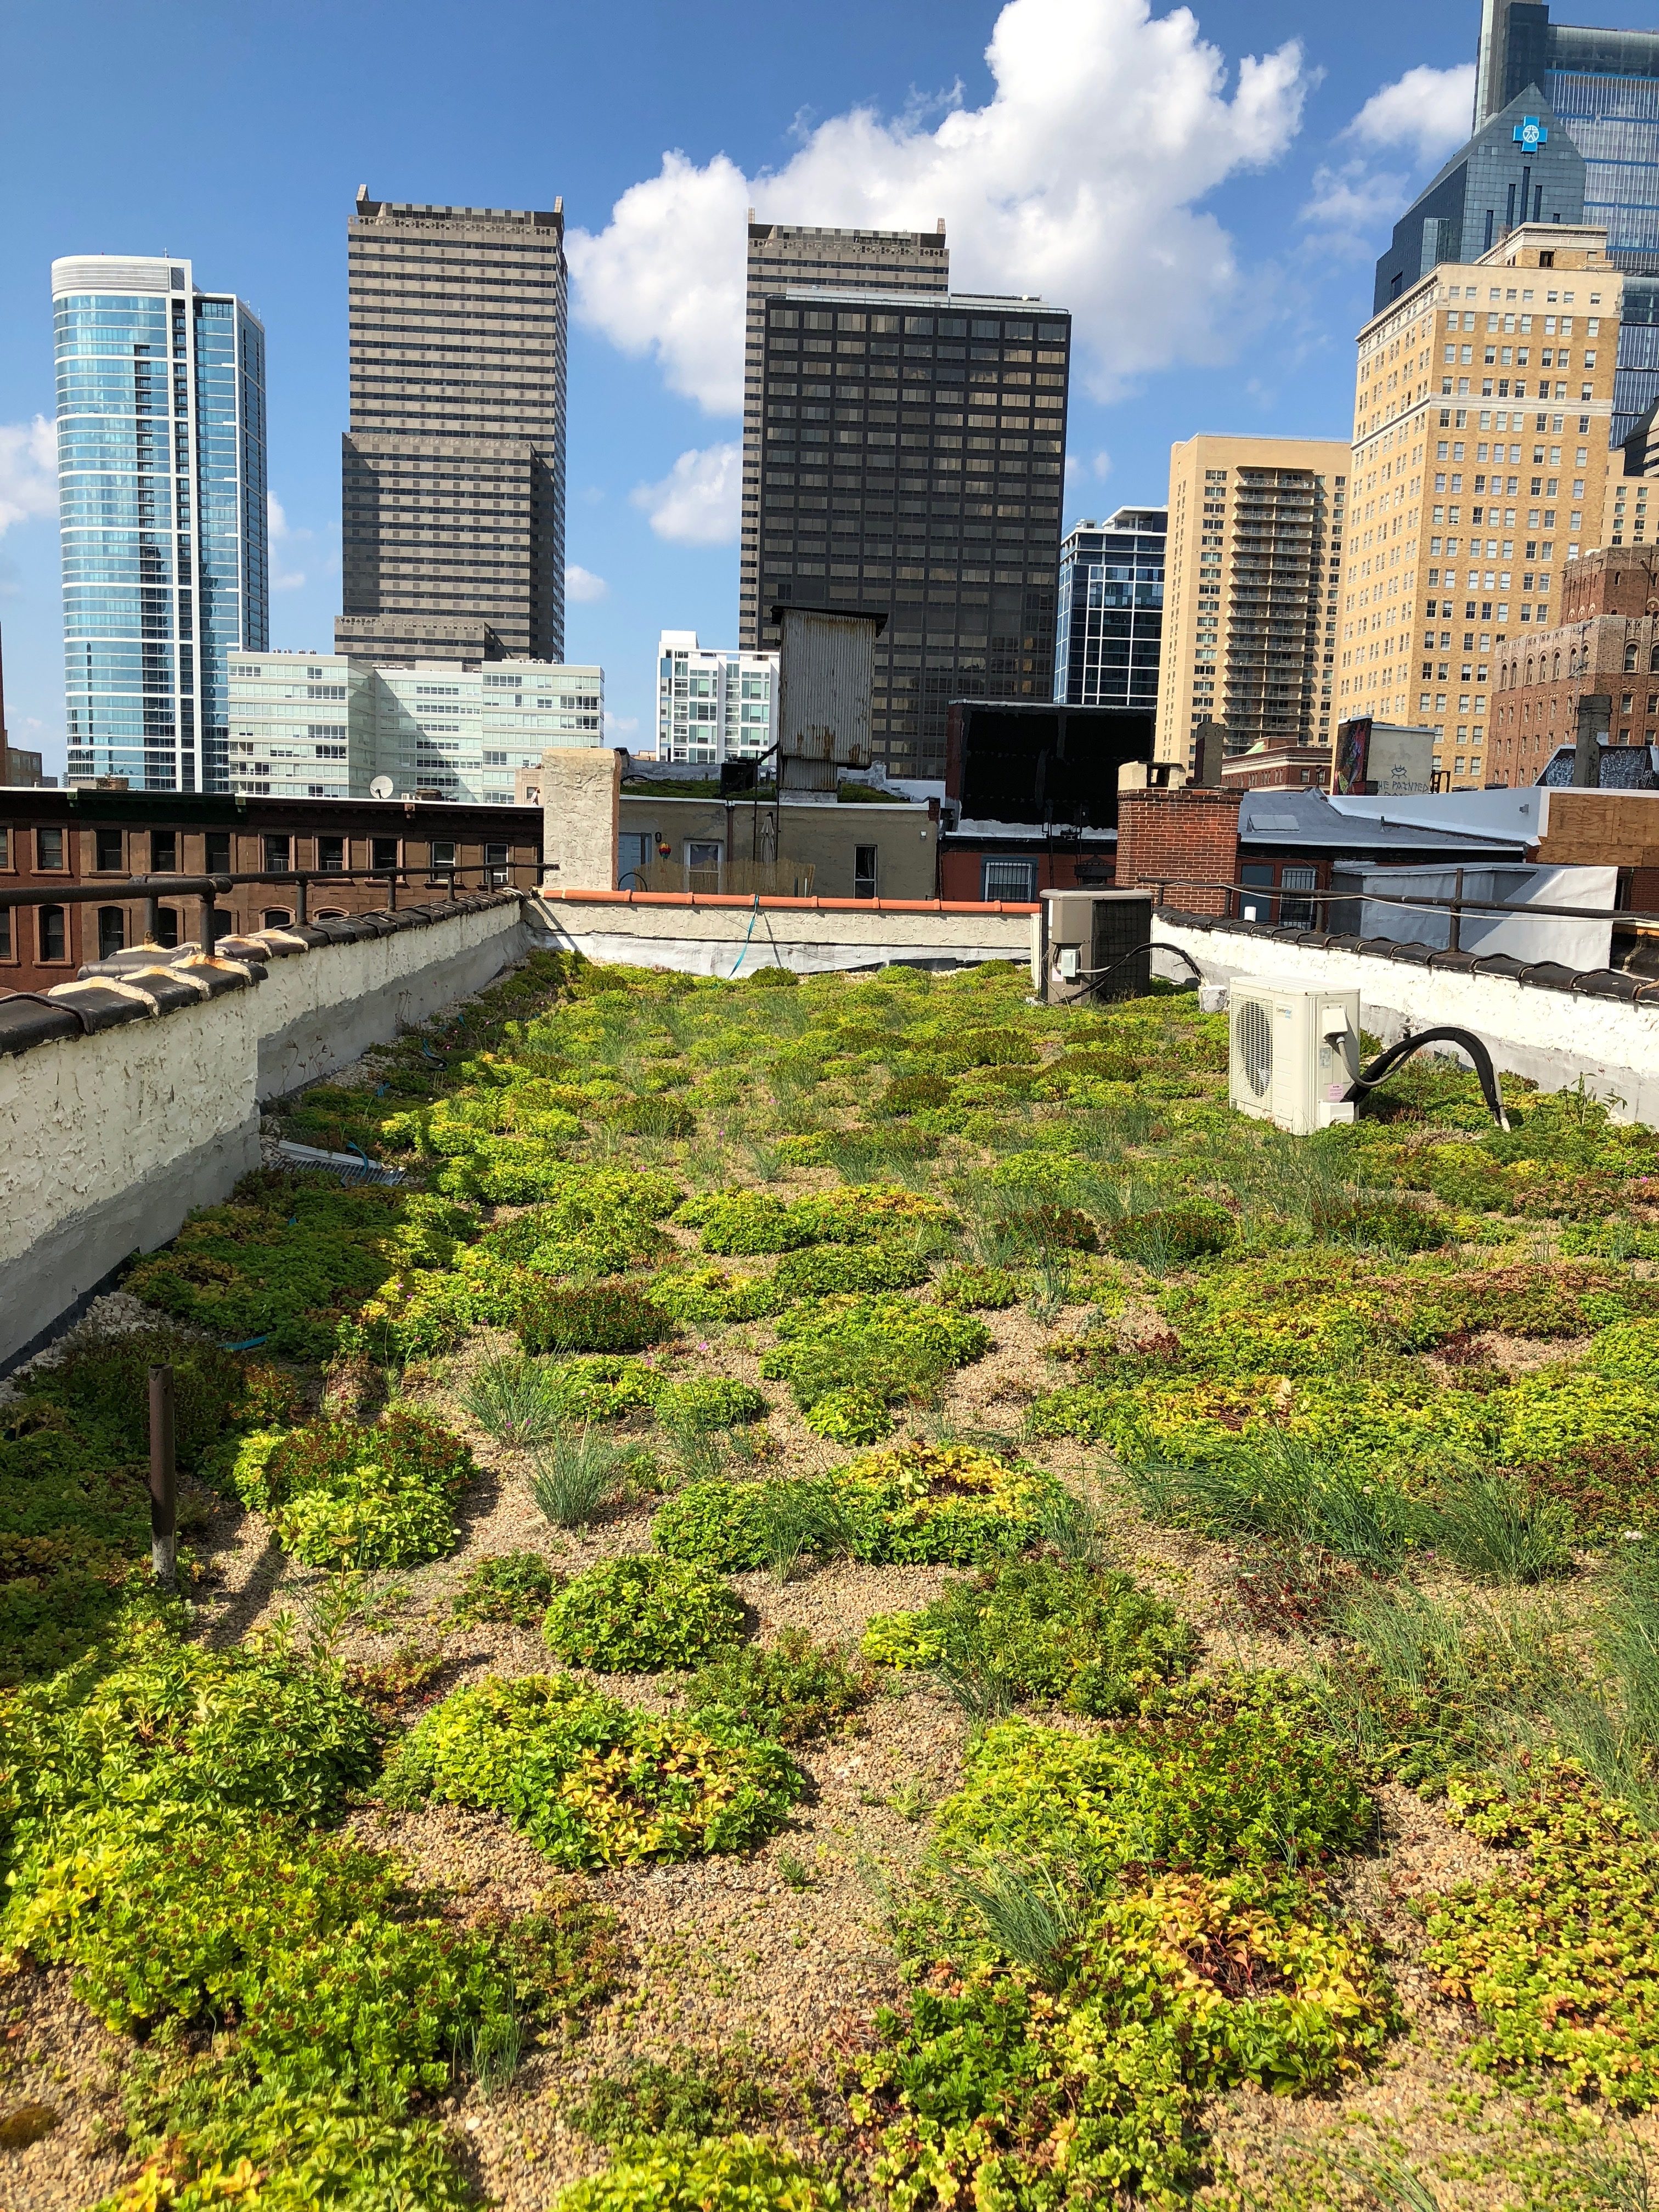 The Solo Real Estate office has had a green roof since 2015